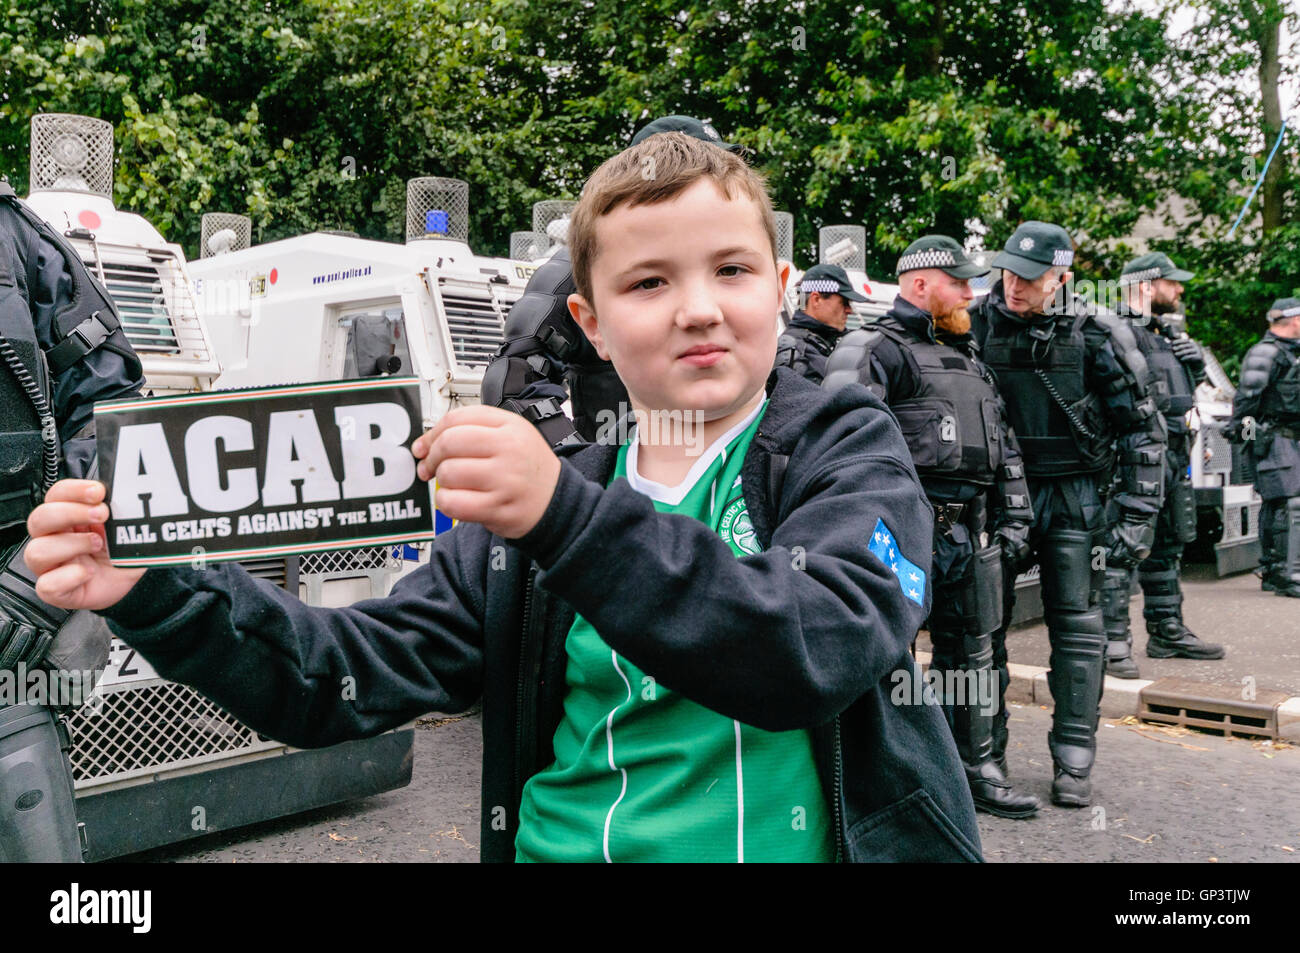 A young boy stands in front of a line of PSNI police officers, and holds a sign saying 'ACAB', claiming it stands for 'All Celts Against the Bill'.   ACAB is normally an acronym for 'All Cops Are Bastards'. Stock Photo